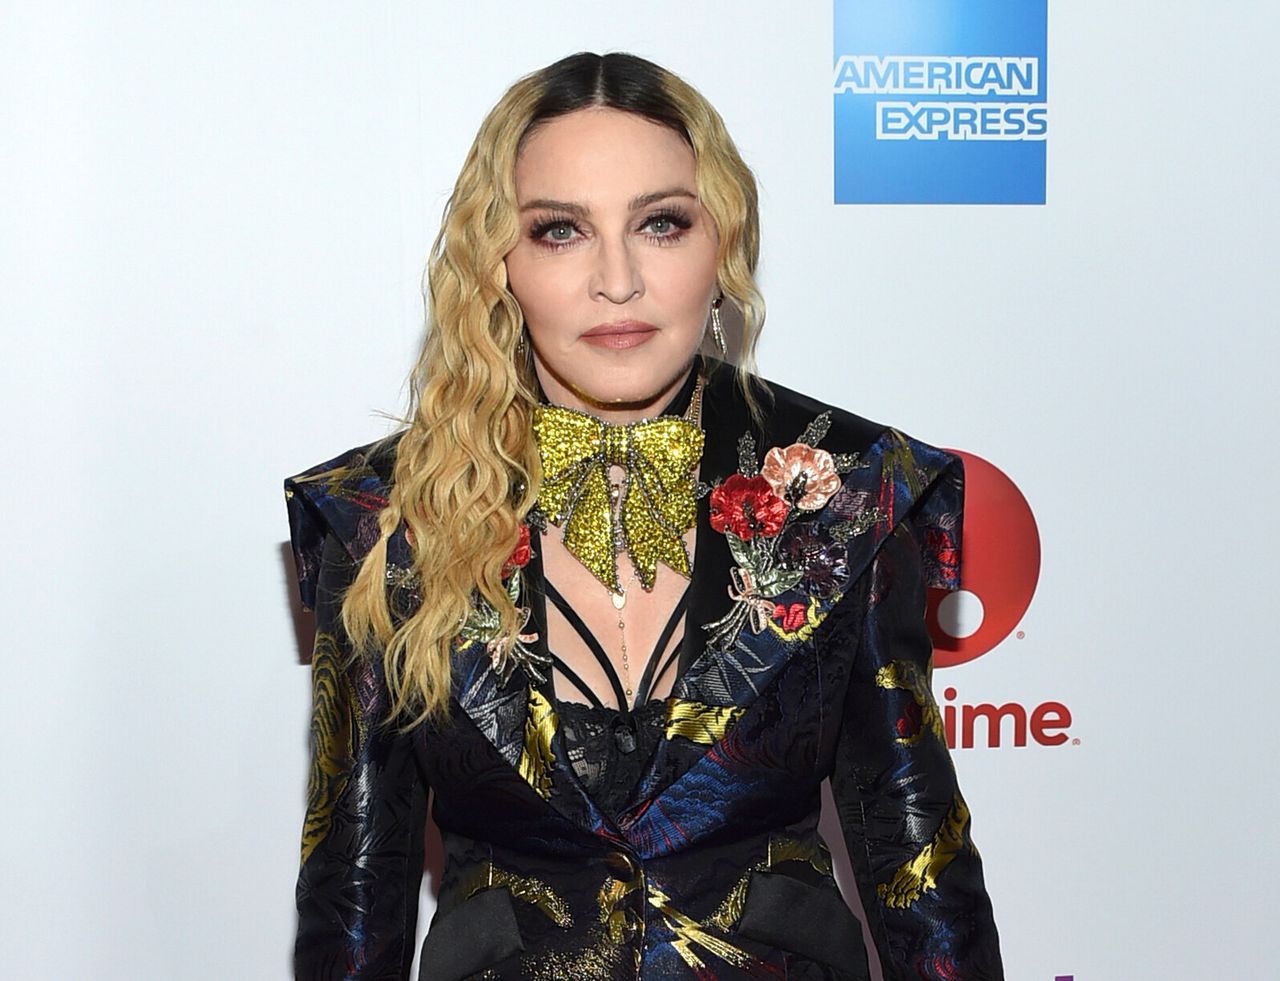 Madonna was criticised by fans for sharing a message about the perils of Covid-19 from a rose petal bath.